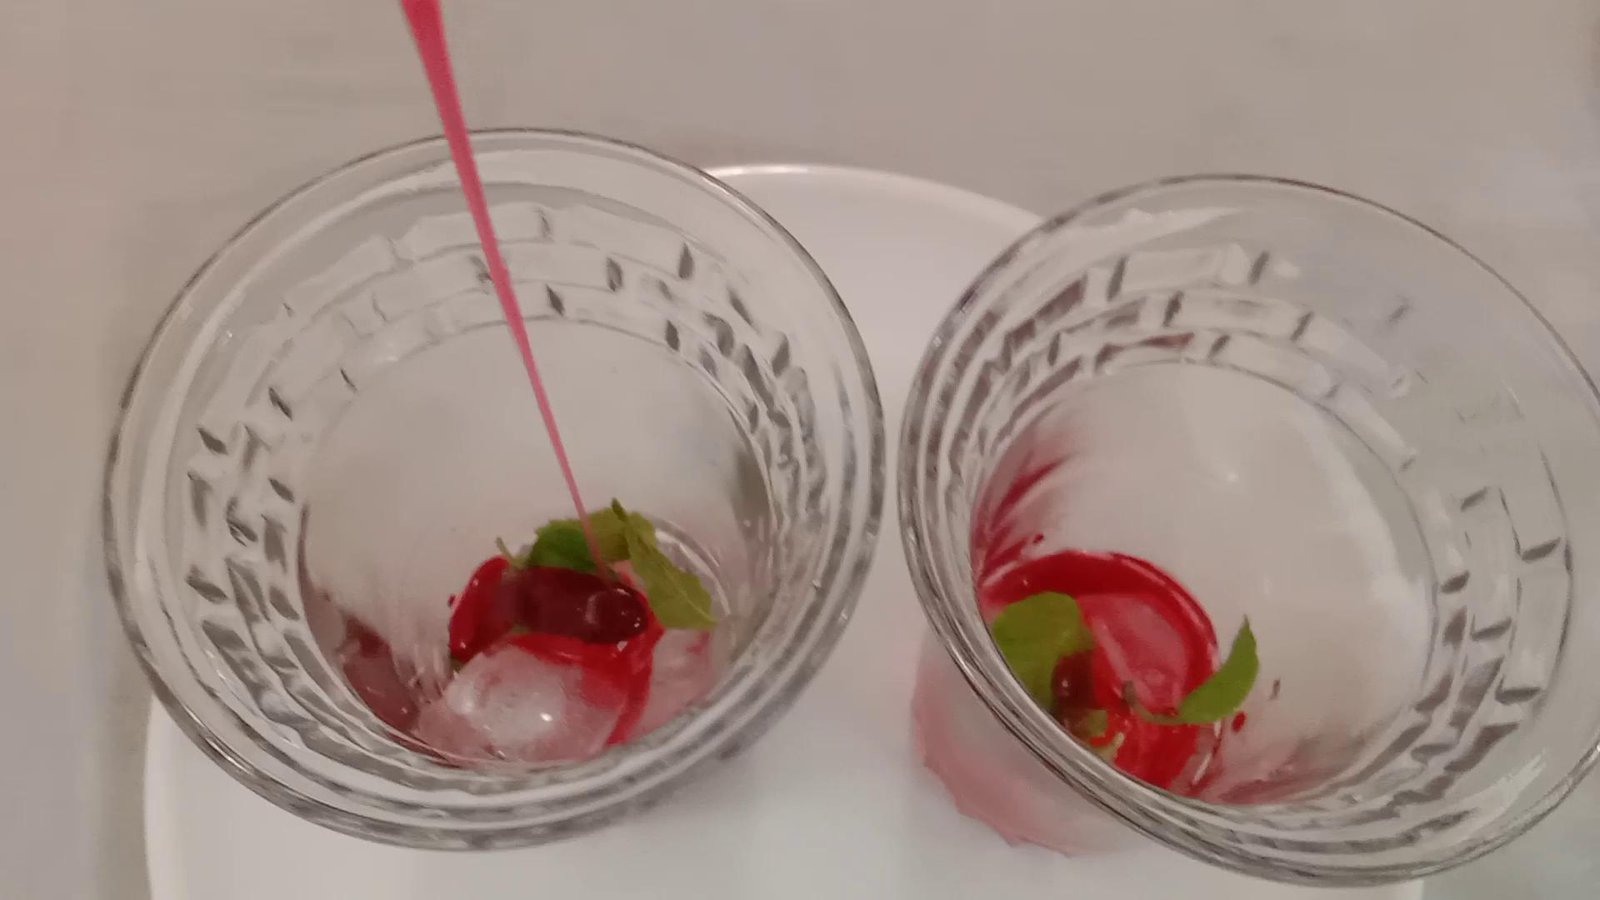 Adding ice cubes, mint leaves and roohafza syrup, Watermelon juice.